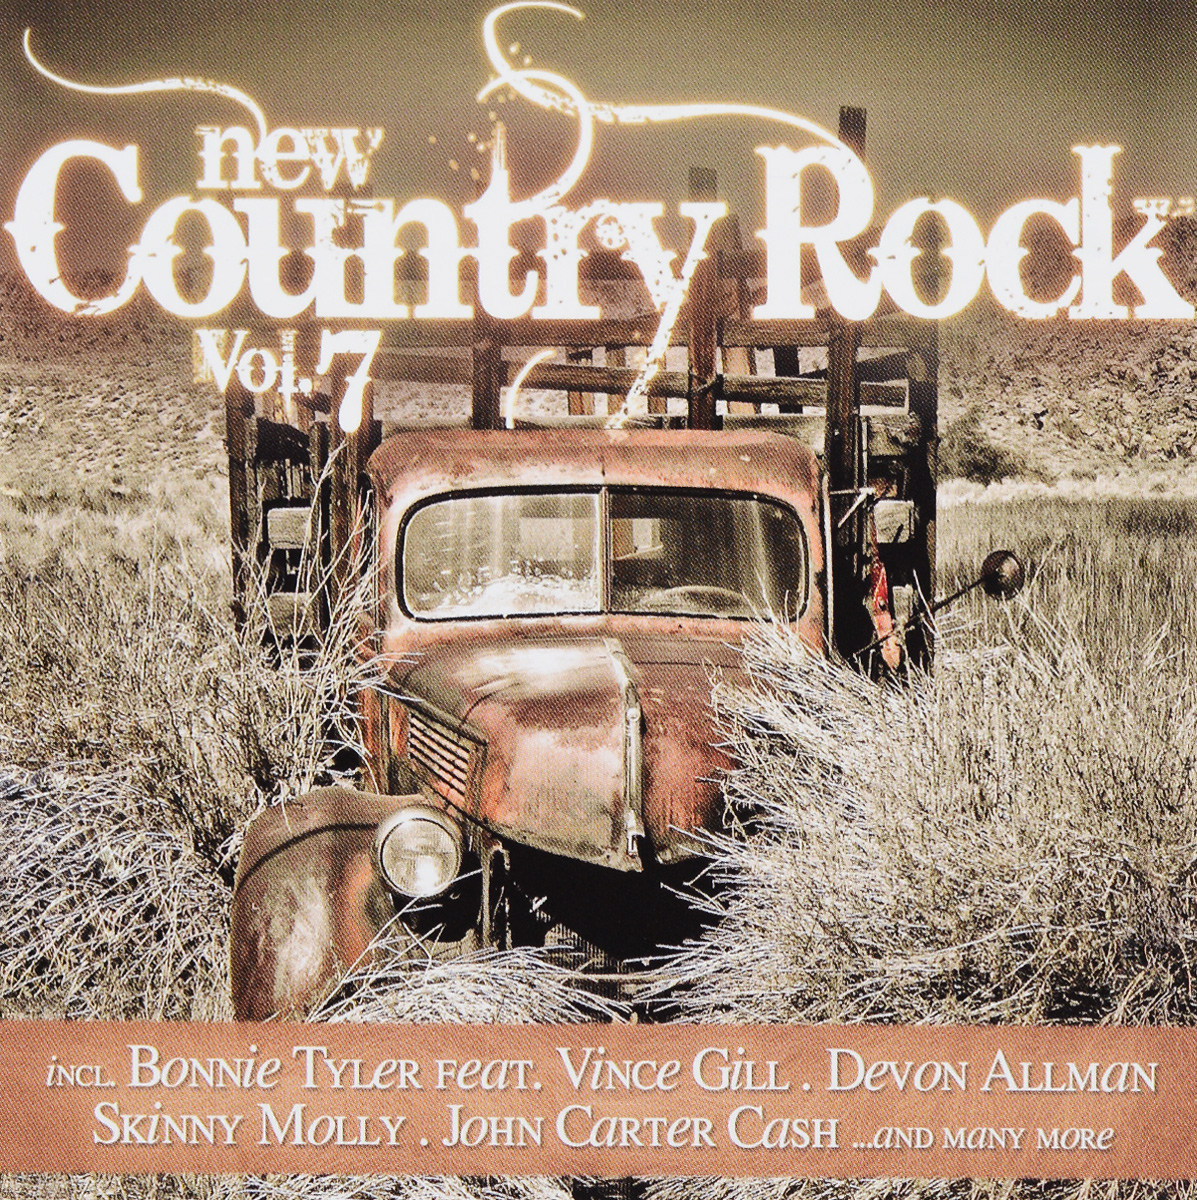 New Country Rock. Vol. 7